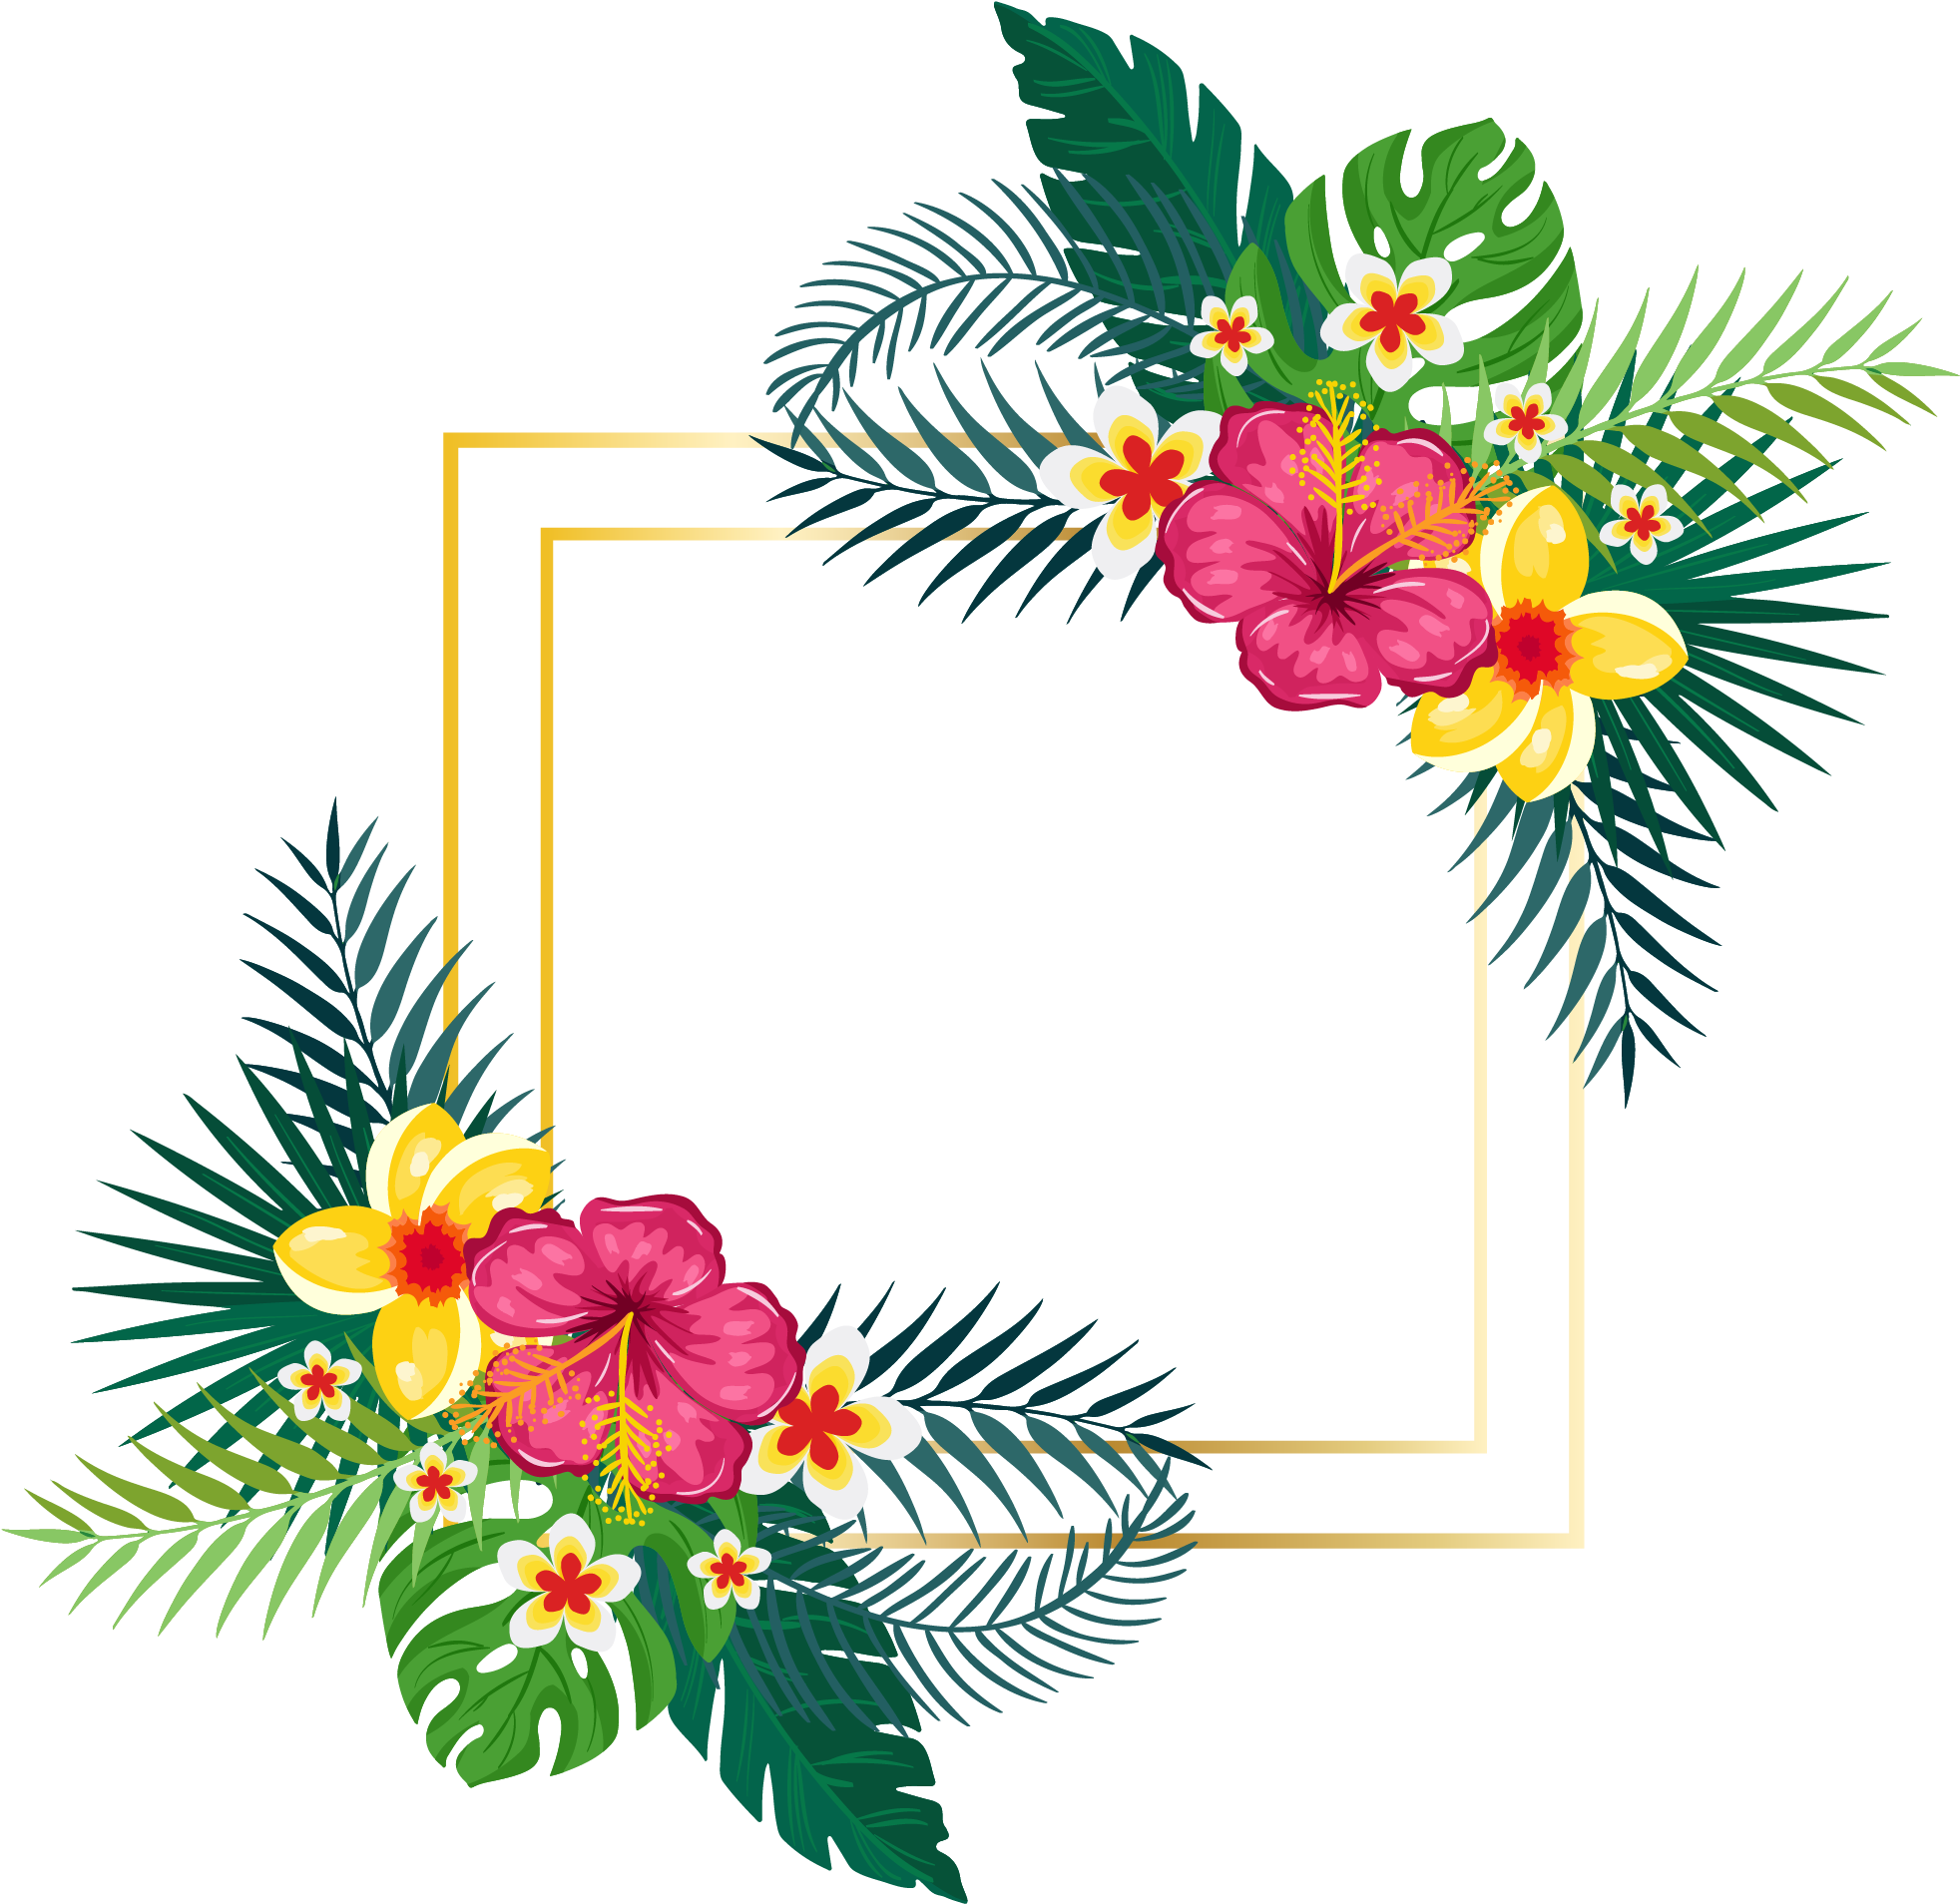 A White Square With Colorful Flowers And Leaves On It